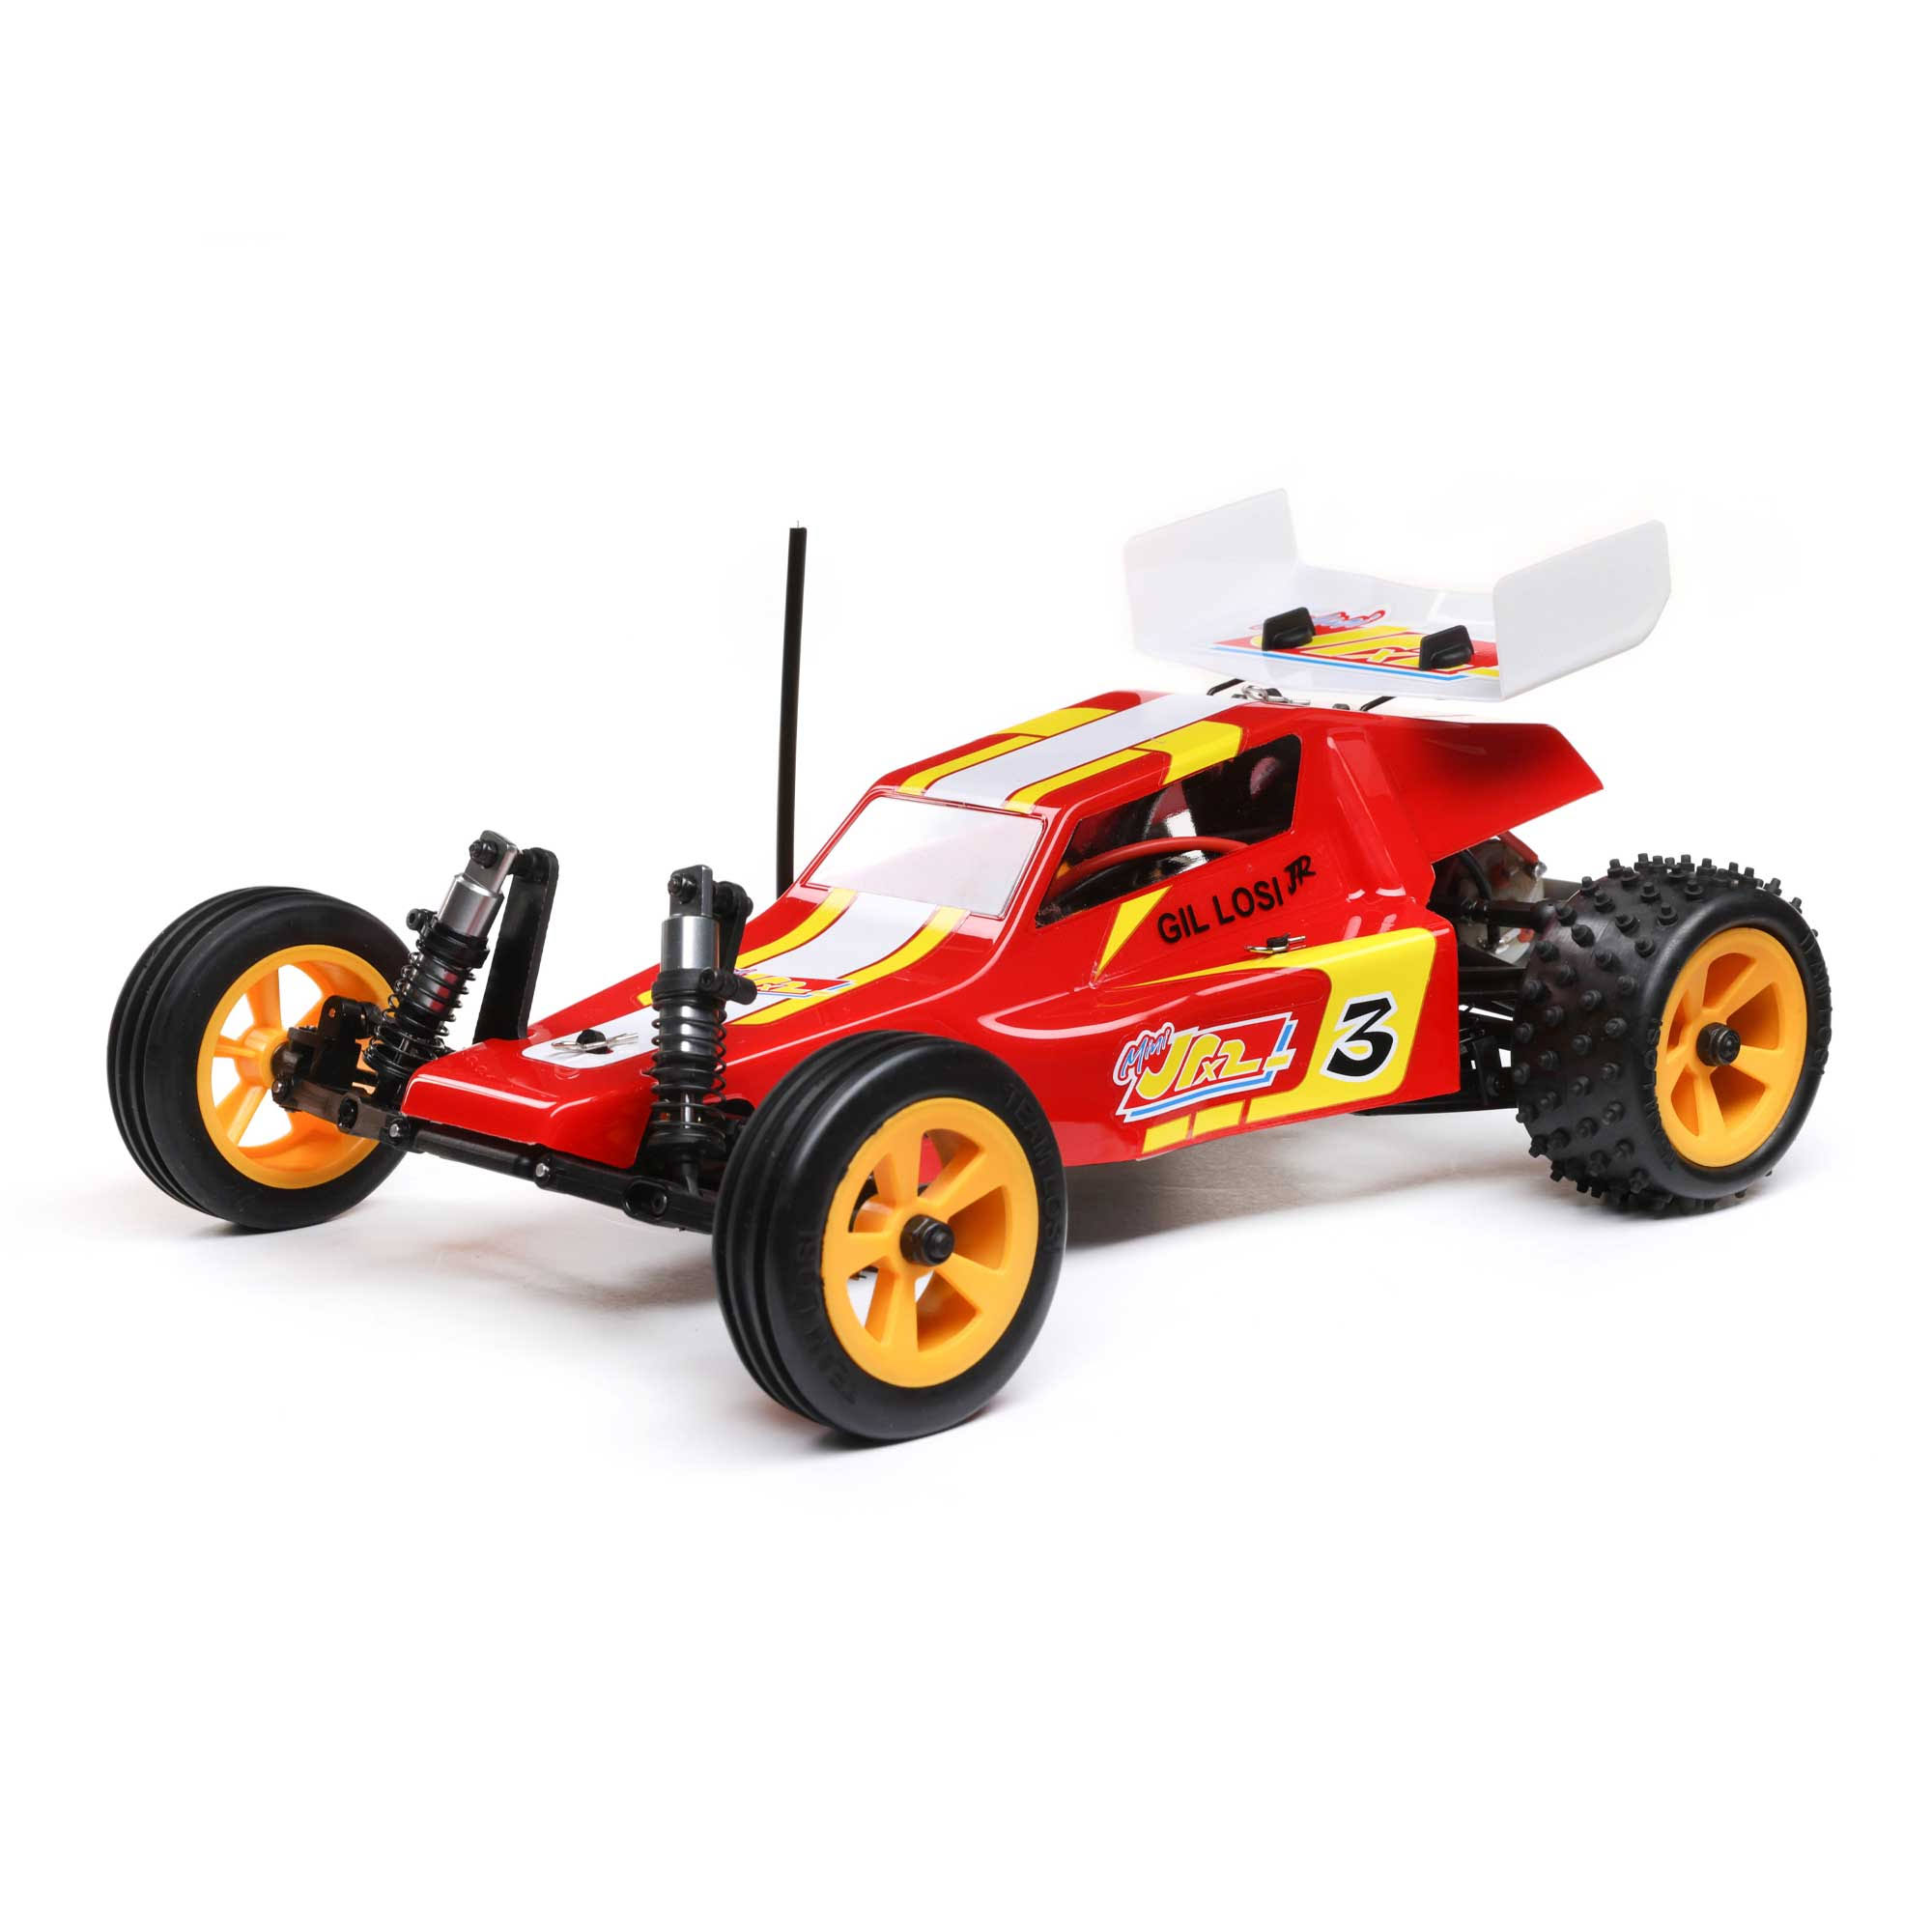 Losi 1/16 Mini JRX2 Brushed 2WD Buggy RTR - Red C-LOS01020T1